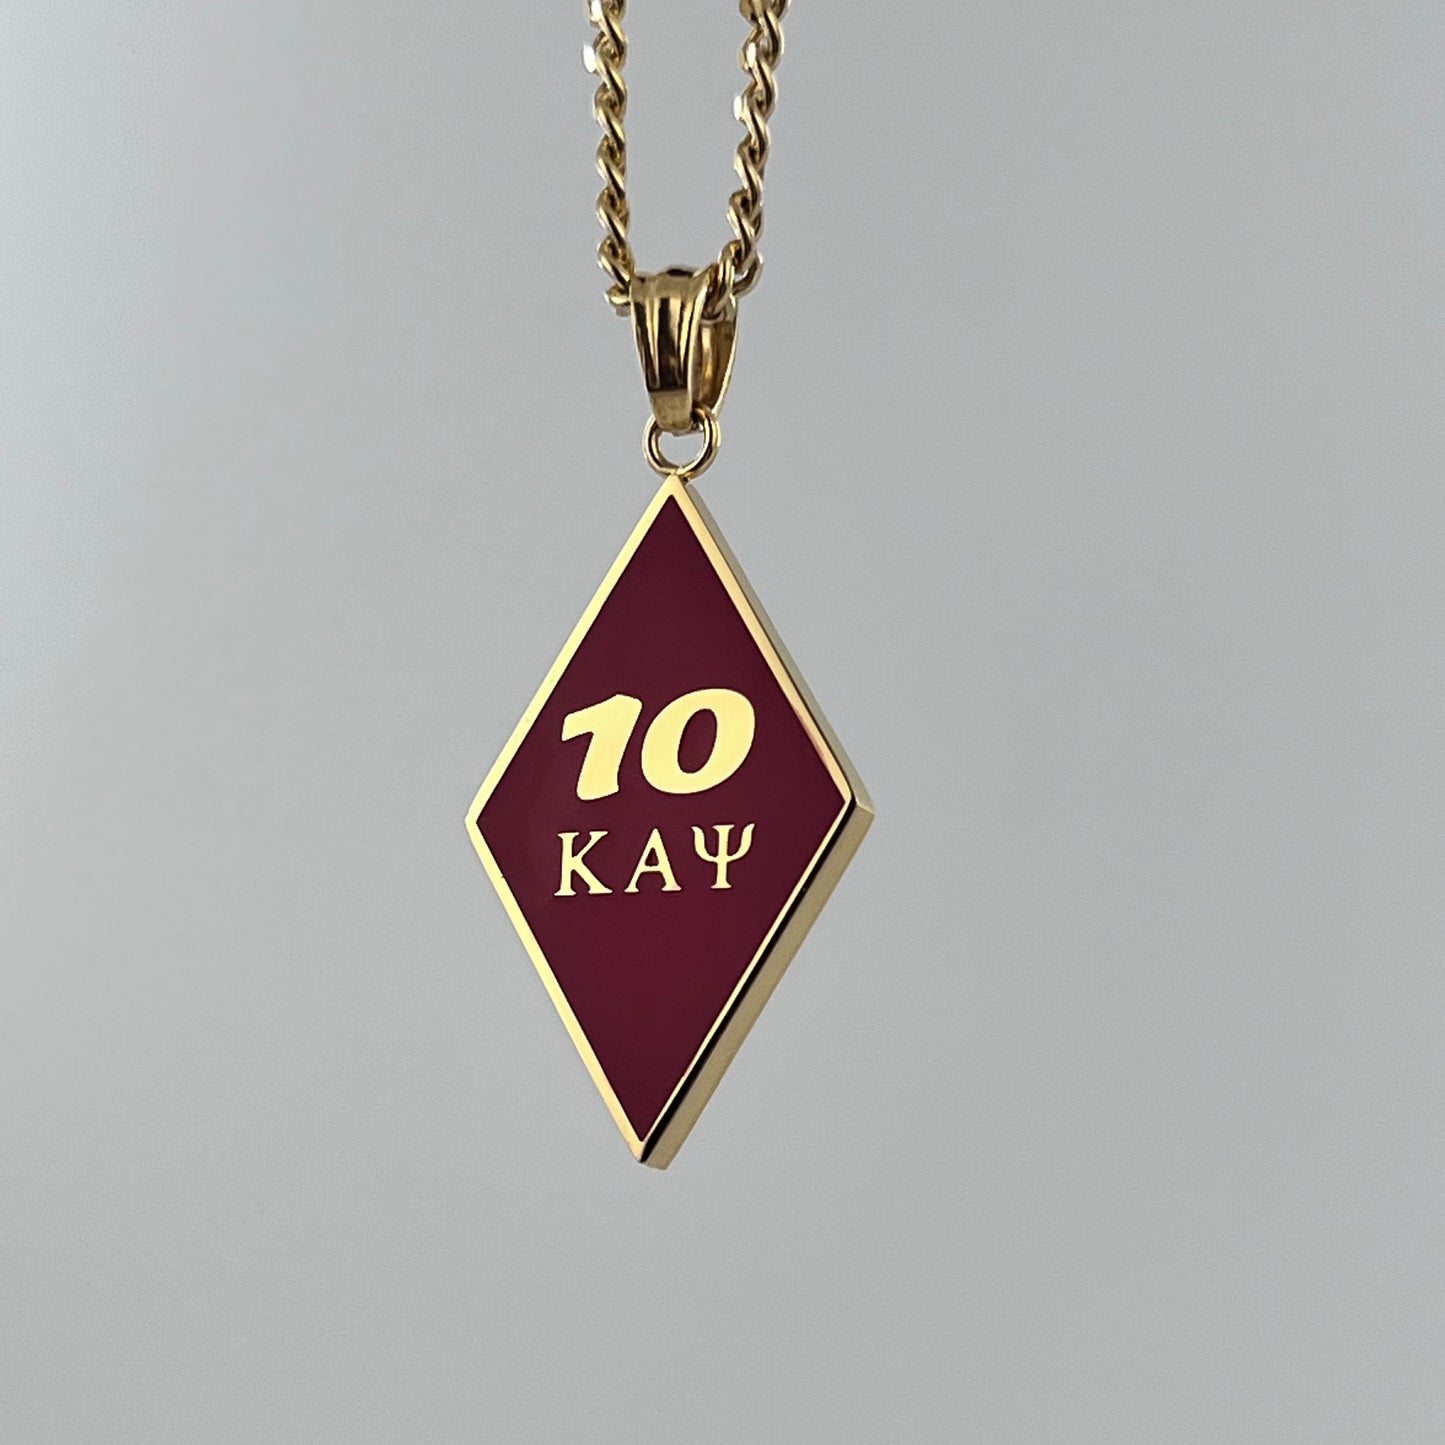 Kappa Alpha Psi necklace/Jewelry and charm. Rep your Klub.   A beyond stunning Kappa Alpha Psi necklace and charm made with Silver. This pendant is made to last for generations and generations, perfect for that special Kappa Alpha Psi member. The ultimate gift to show off your fraternity pride is here!  • Official Kappa Alpha Psi Licensed Product: passed through examination and requirements by the Fraternity as a whole.